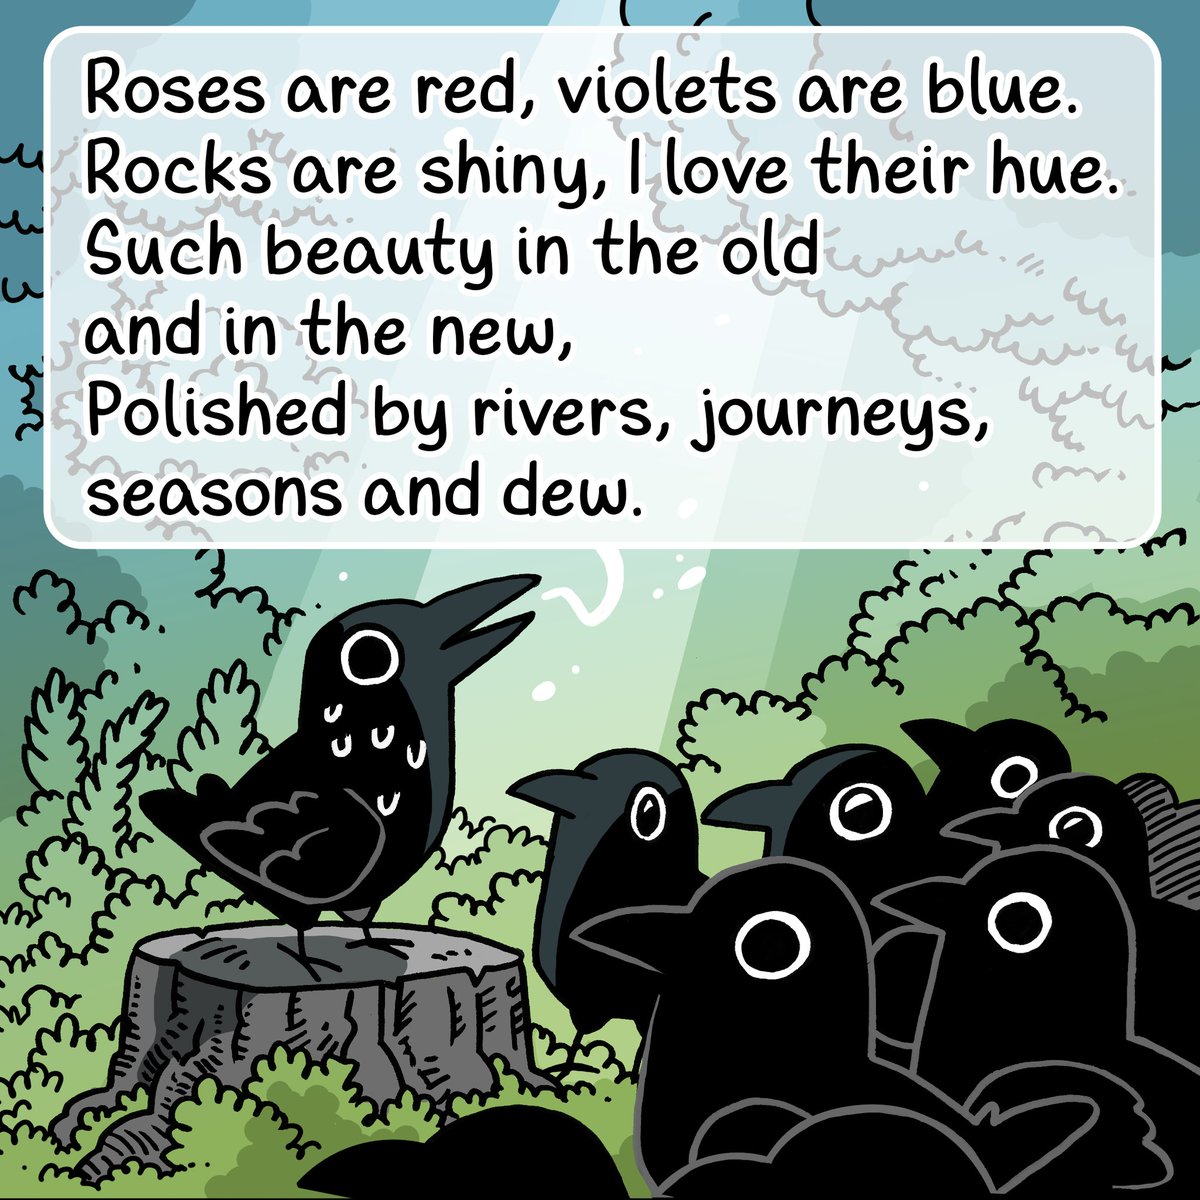 New Crow Time > POETRY [1/4] 🎀 